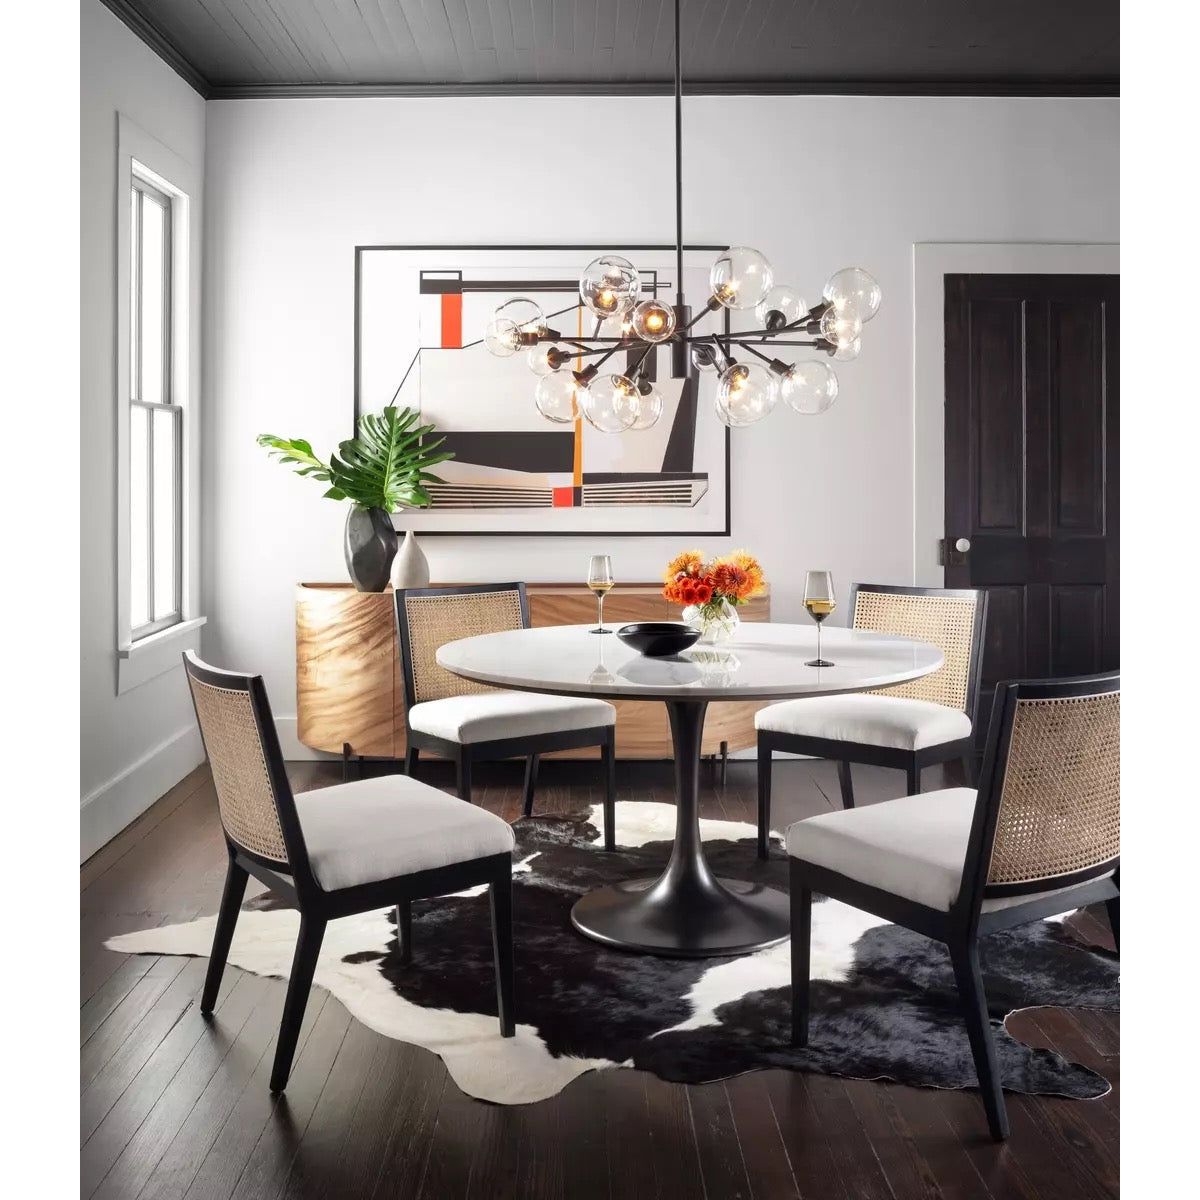 Modern dining room with a round white table and four Antonia Cane Armless Dining Chairs with high-performance fabric seating on a black and white cowhide rug. A contemporary chandelier with exposed bulbs hangs above the table. The room features a black modern art piece on the wall and a wooden side cabinet with decor.